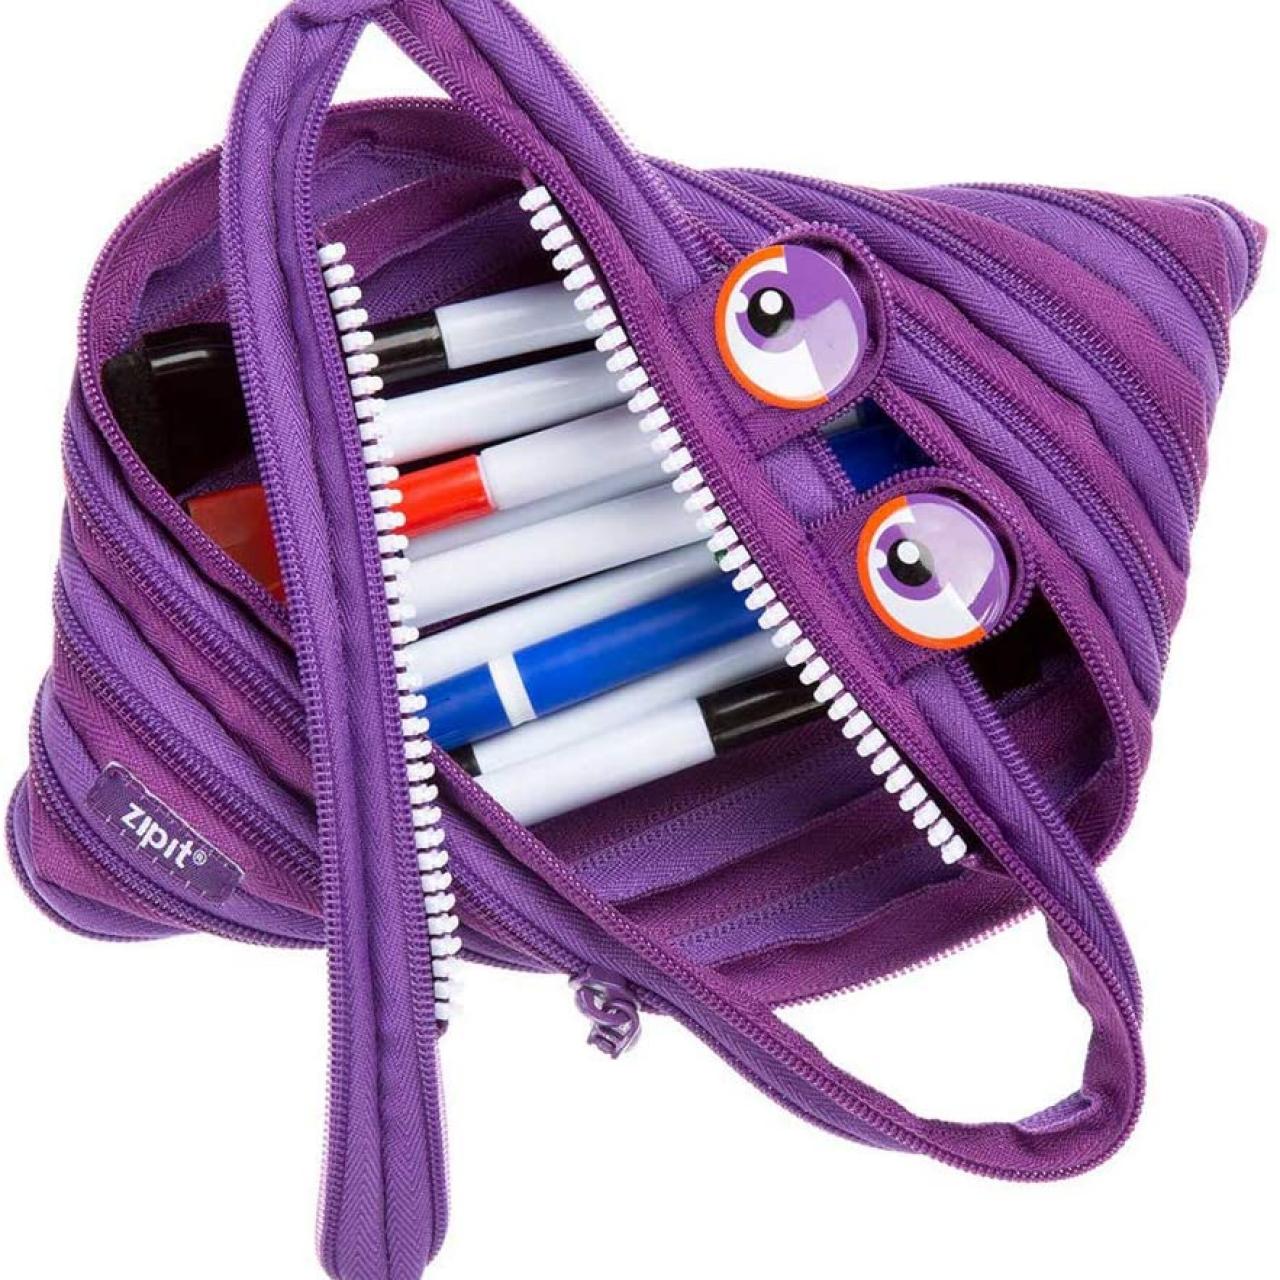 Seriously cool pencil cases for back to school without the drama. - Toby  and Roo